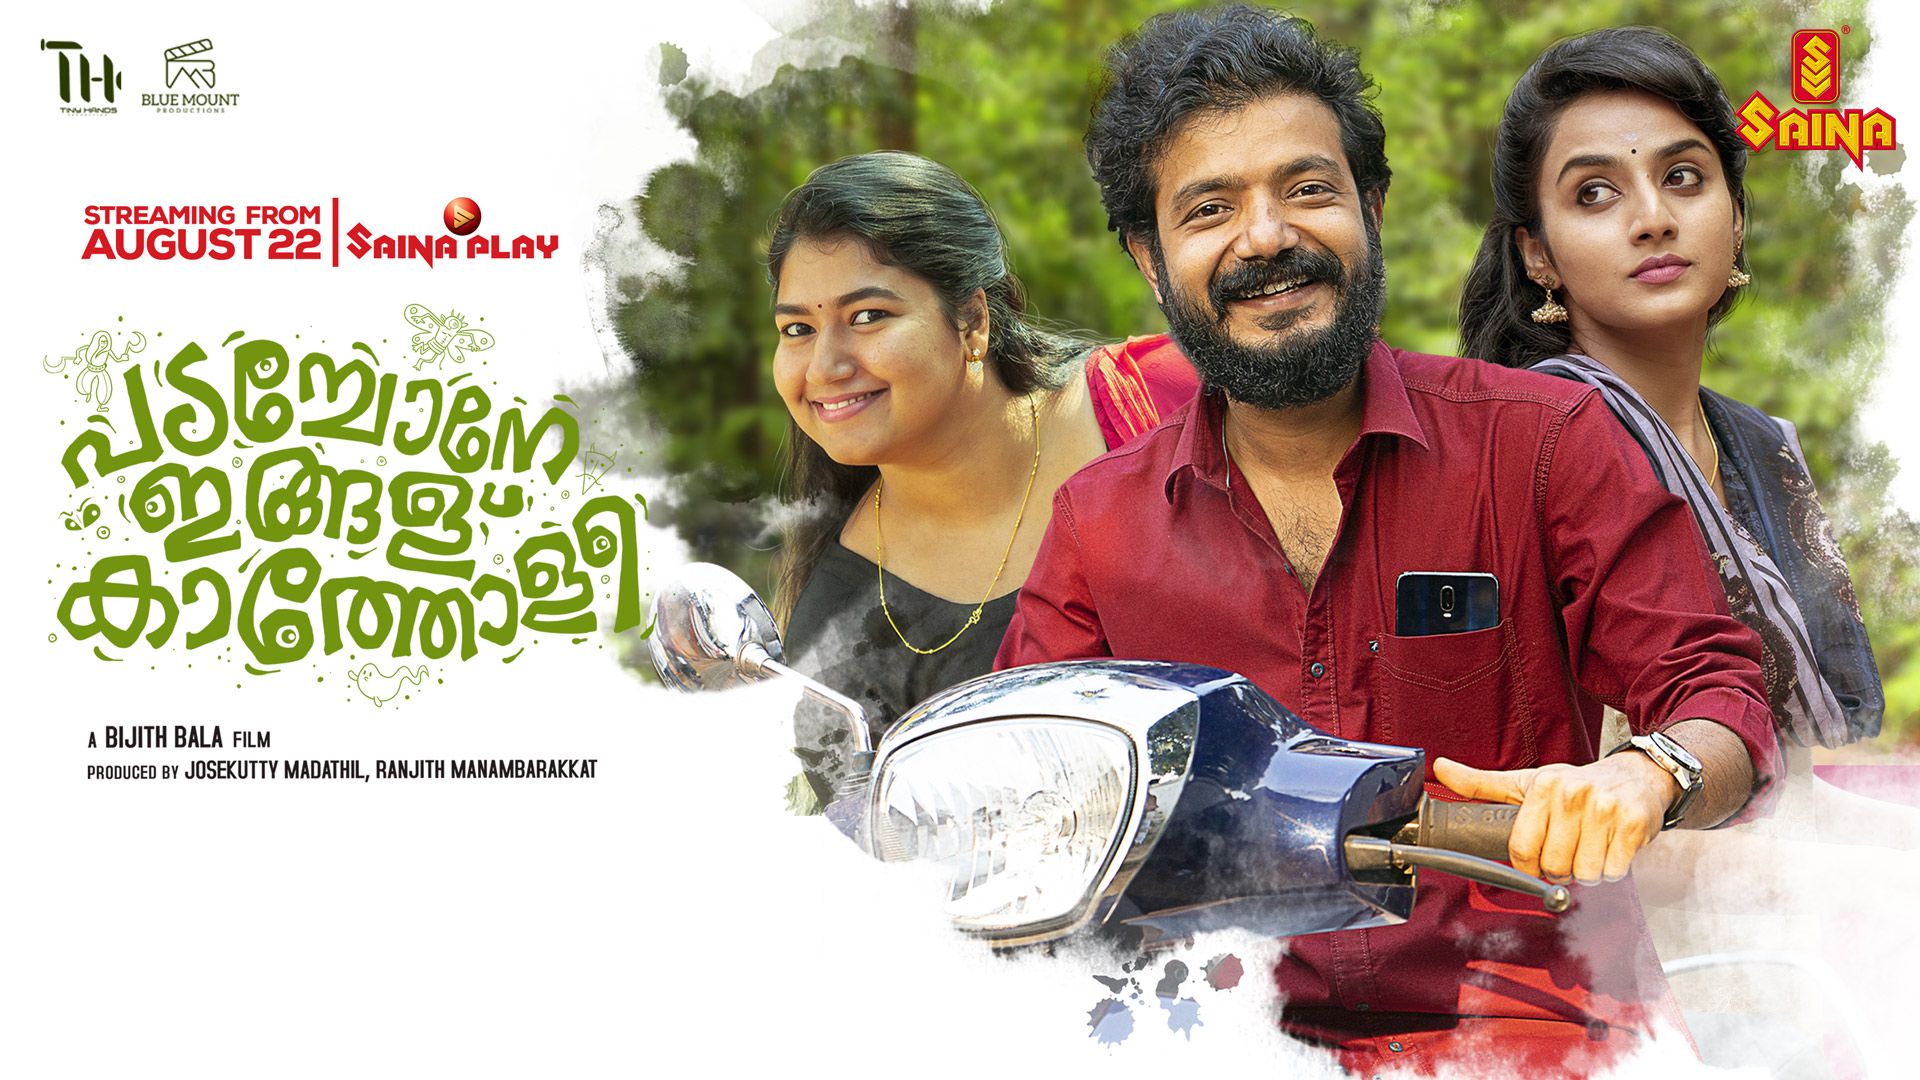 Week 42 TRP Rating Report of malayalam Television Channels - Latest Data 2